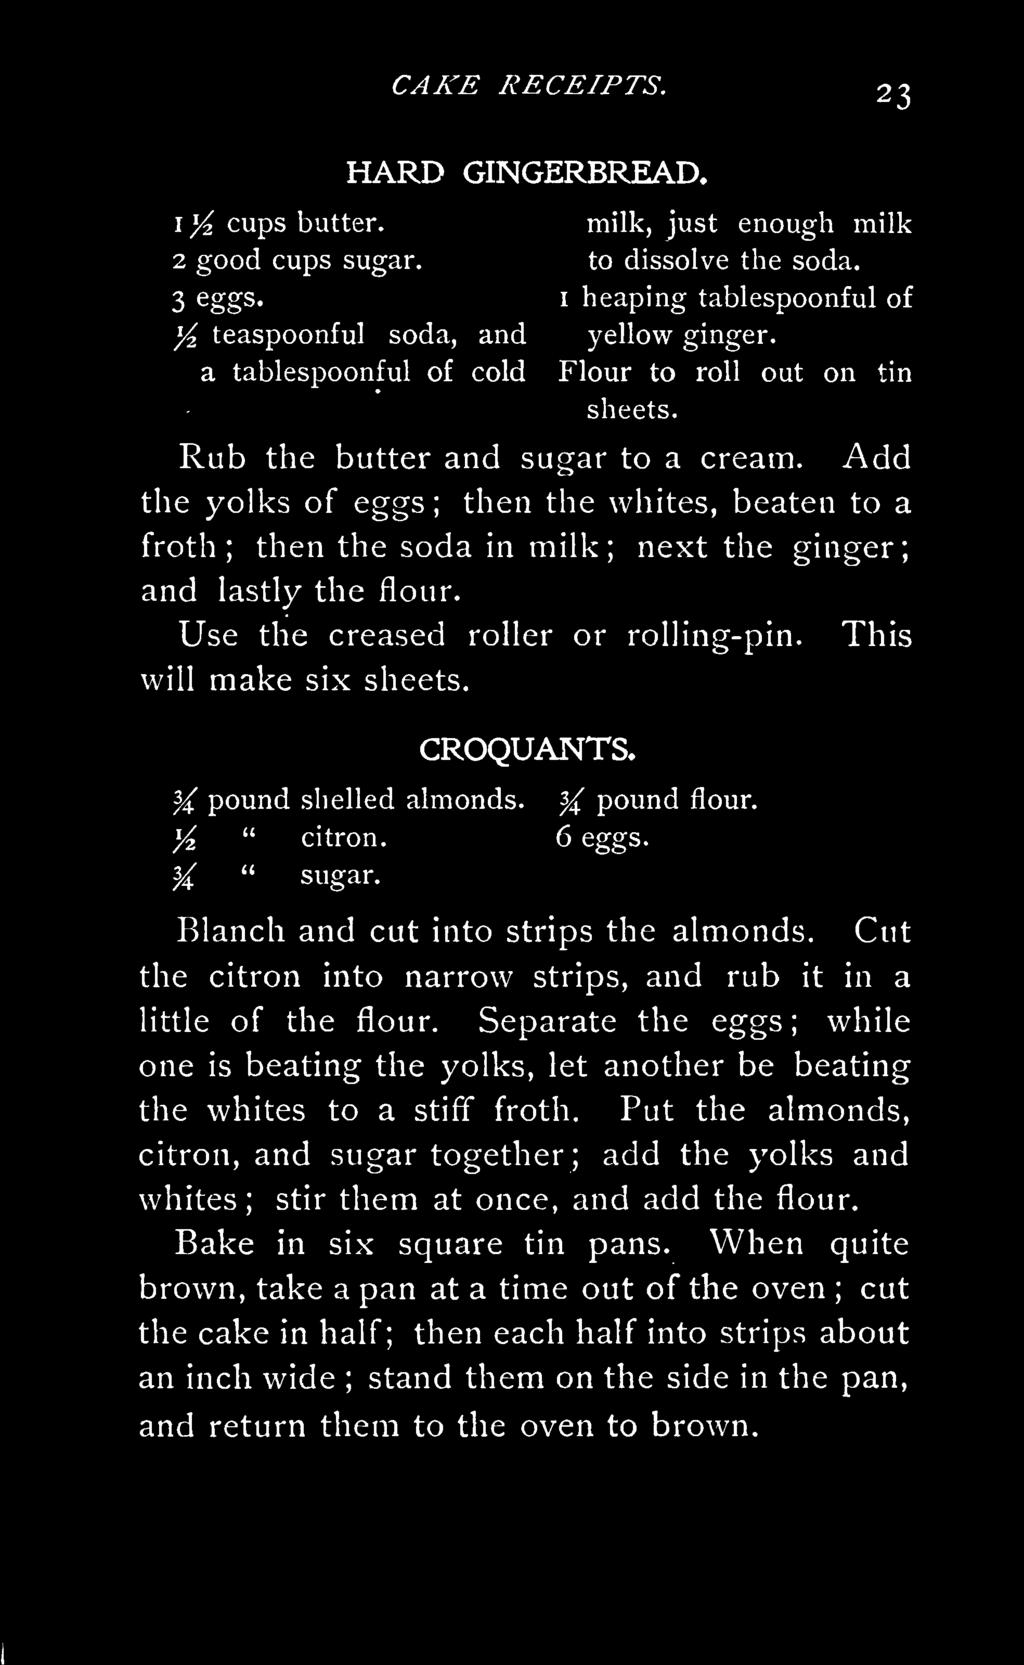 Add the yolks of eggs ; then the whites, beaten to a froth; then the soda in milk; next the ginger; and lastly the flour. Use the creased roller or rolling-pin. This will make six sheets. CROQUANTS.